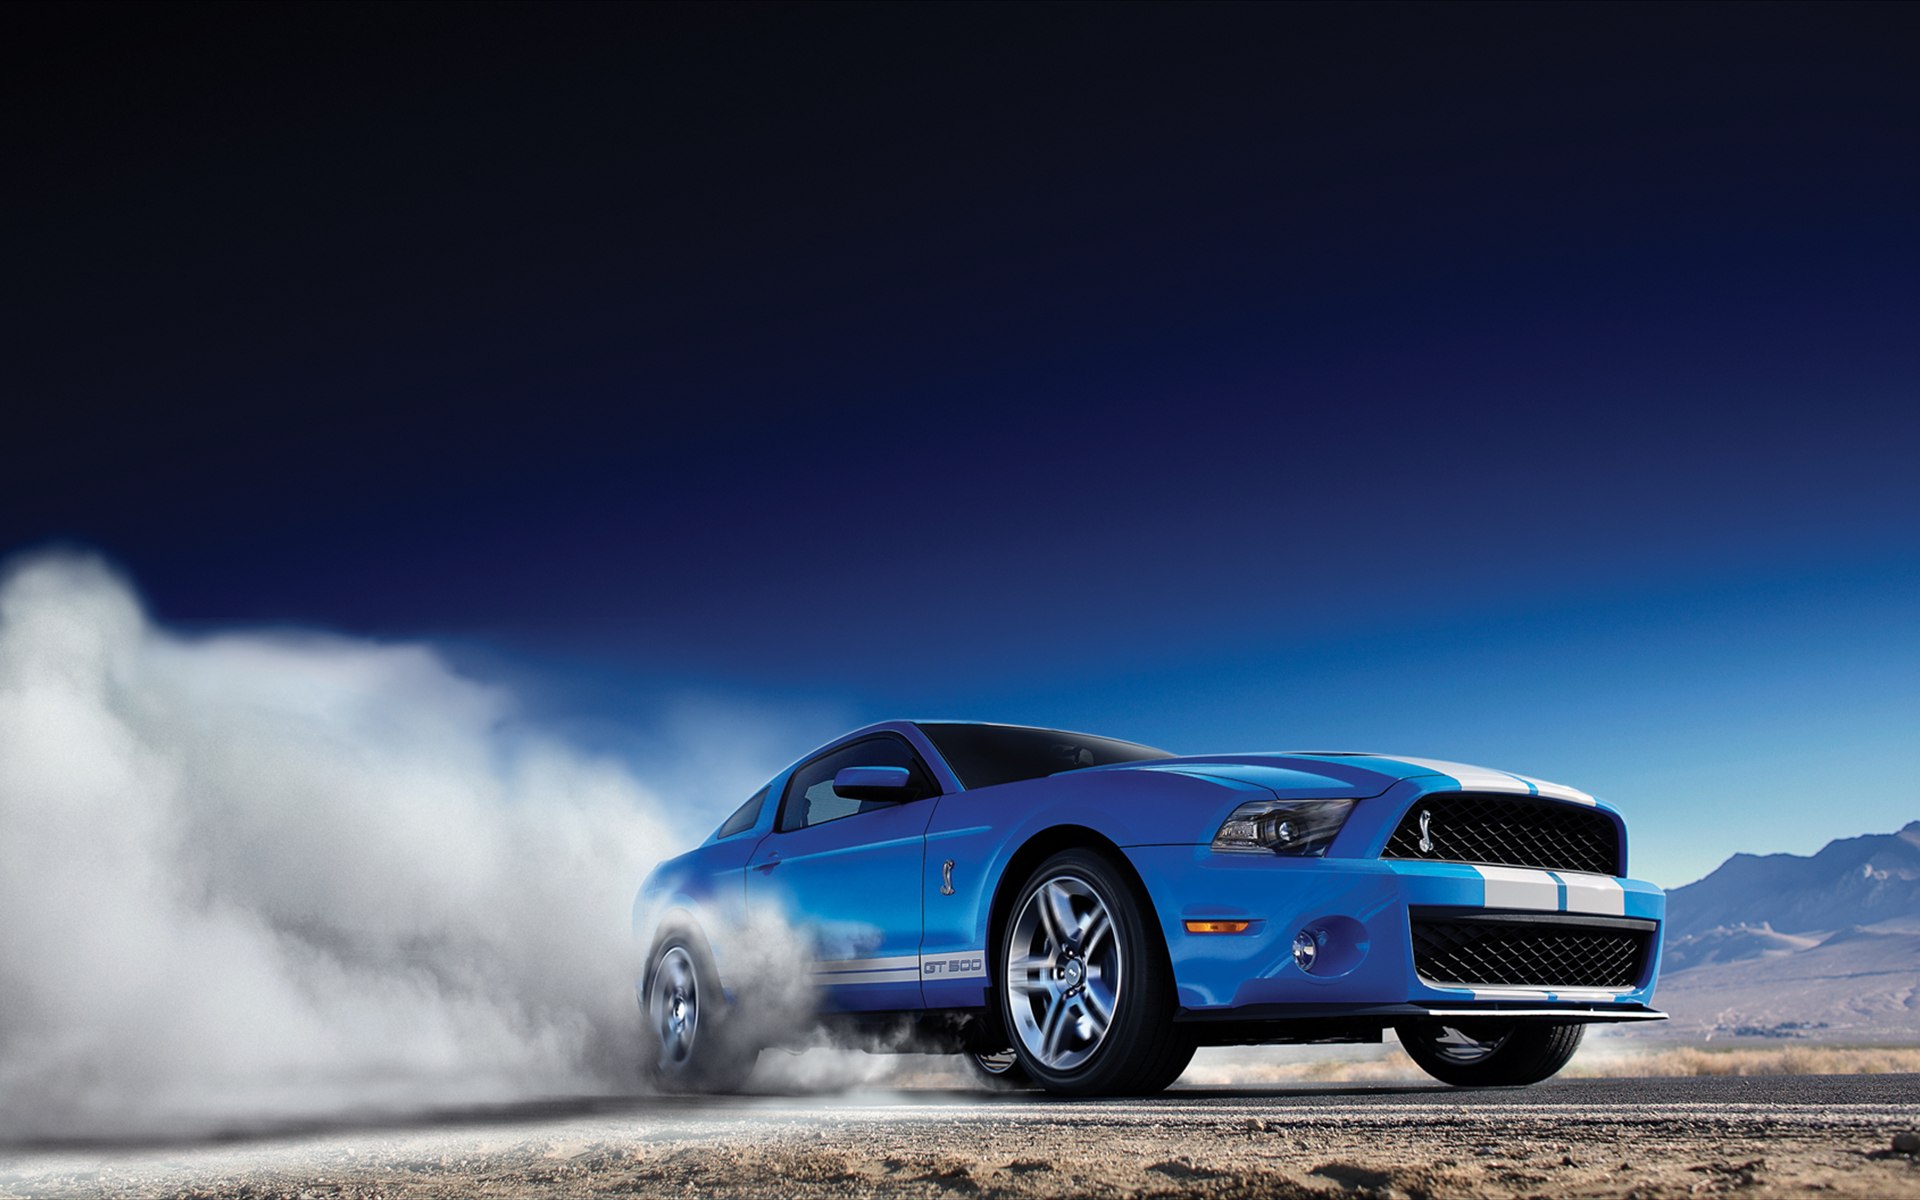 2011 Ford Shelby #4198332, 1920x1200 | All For Desktop